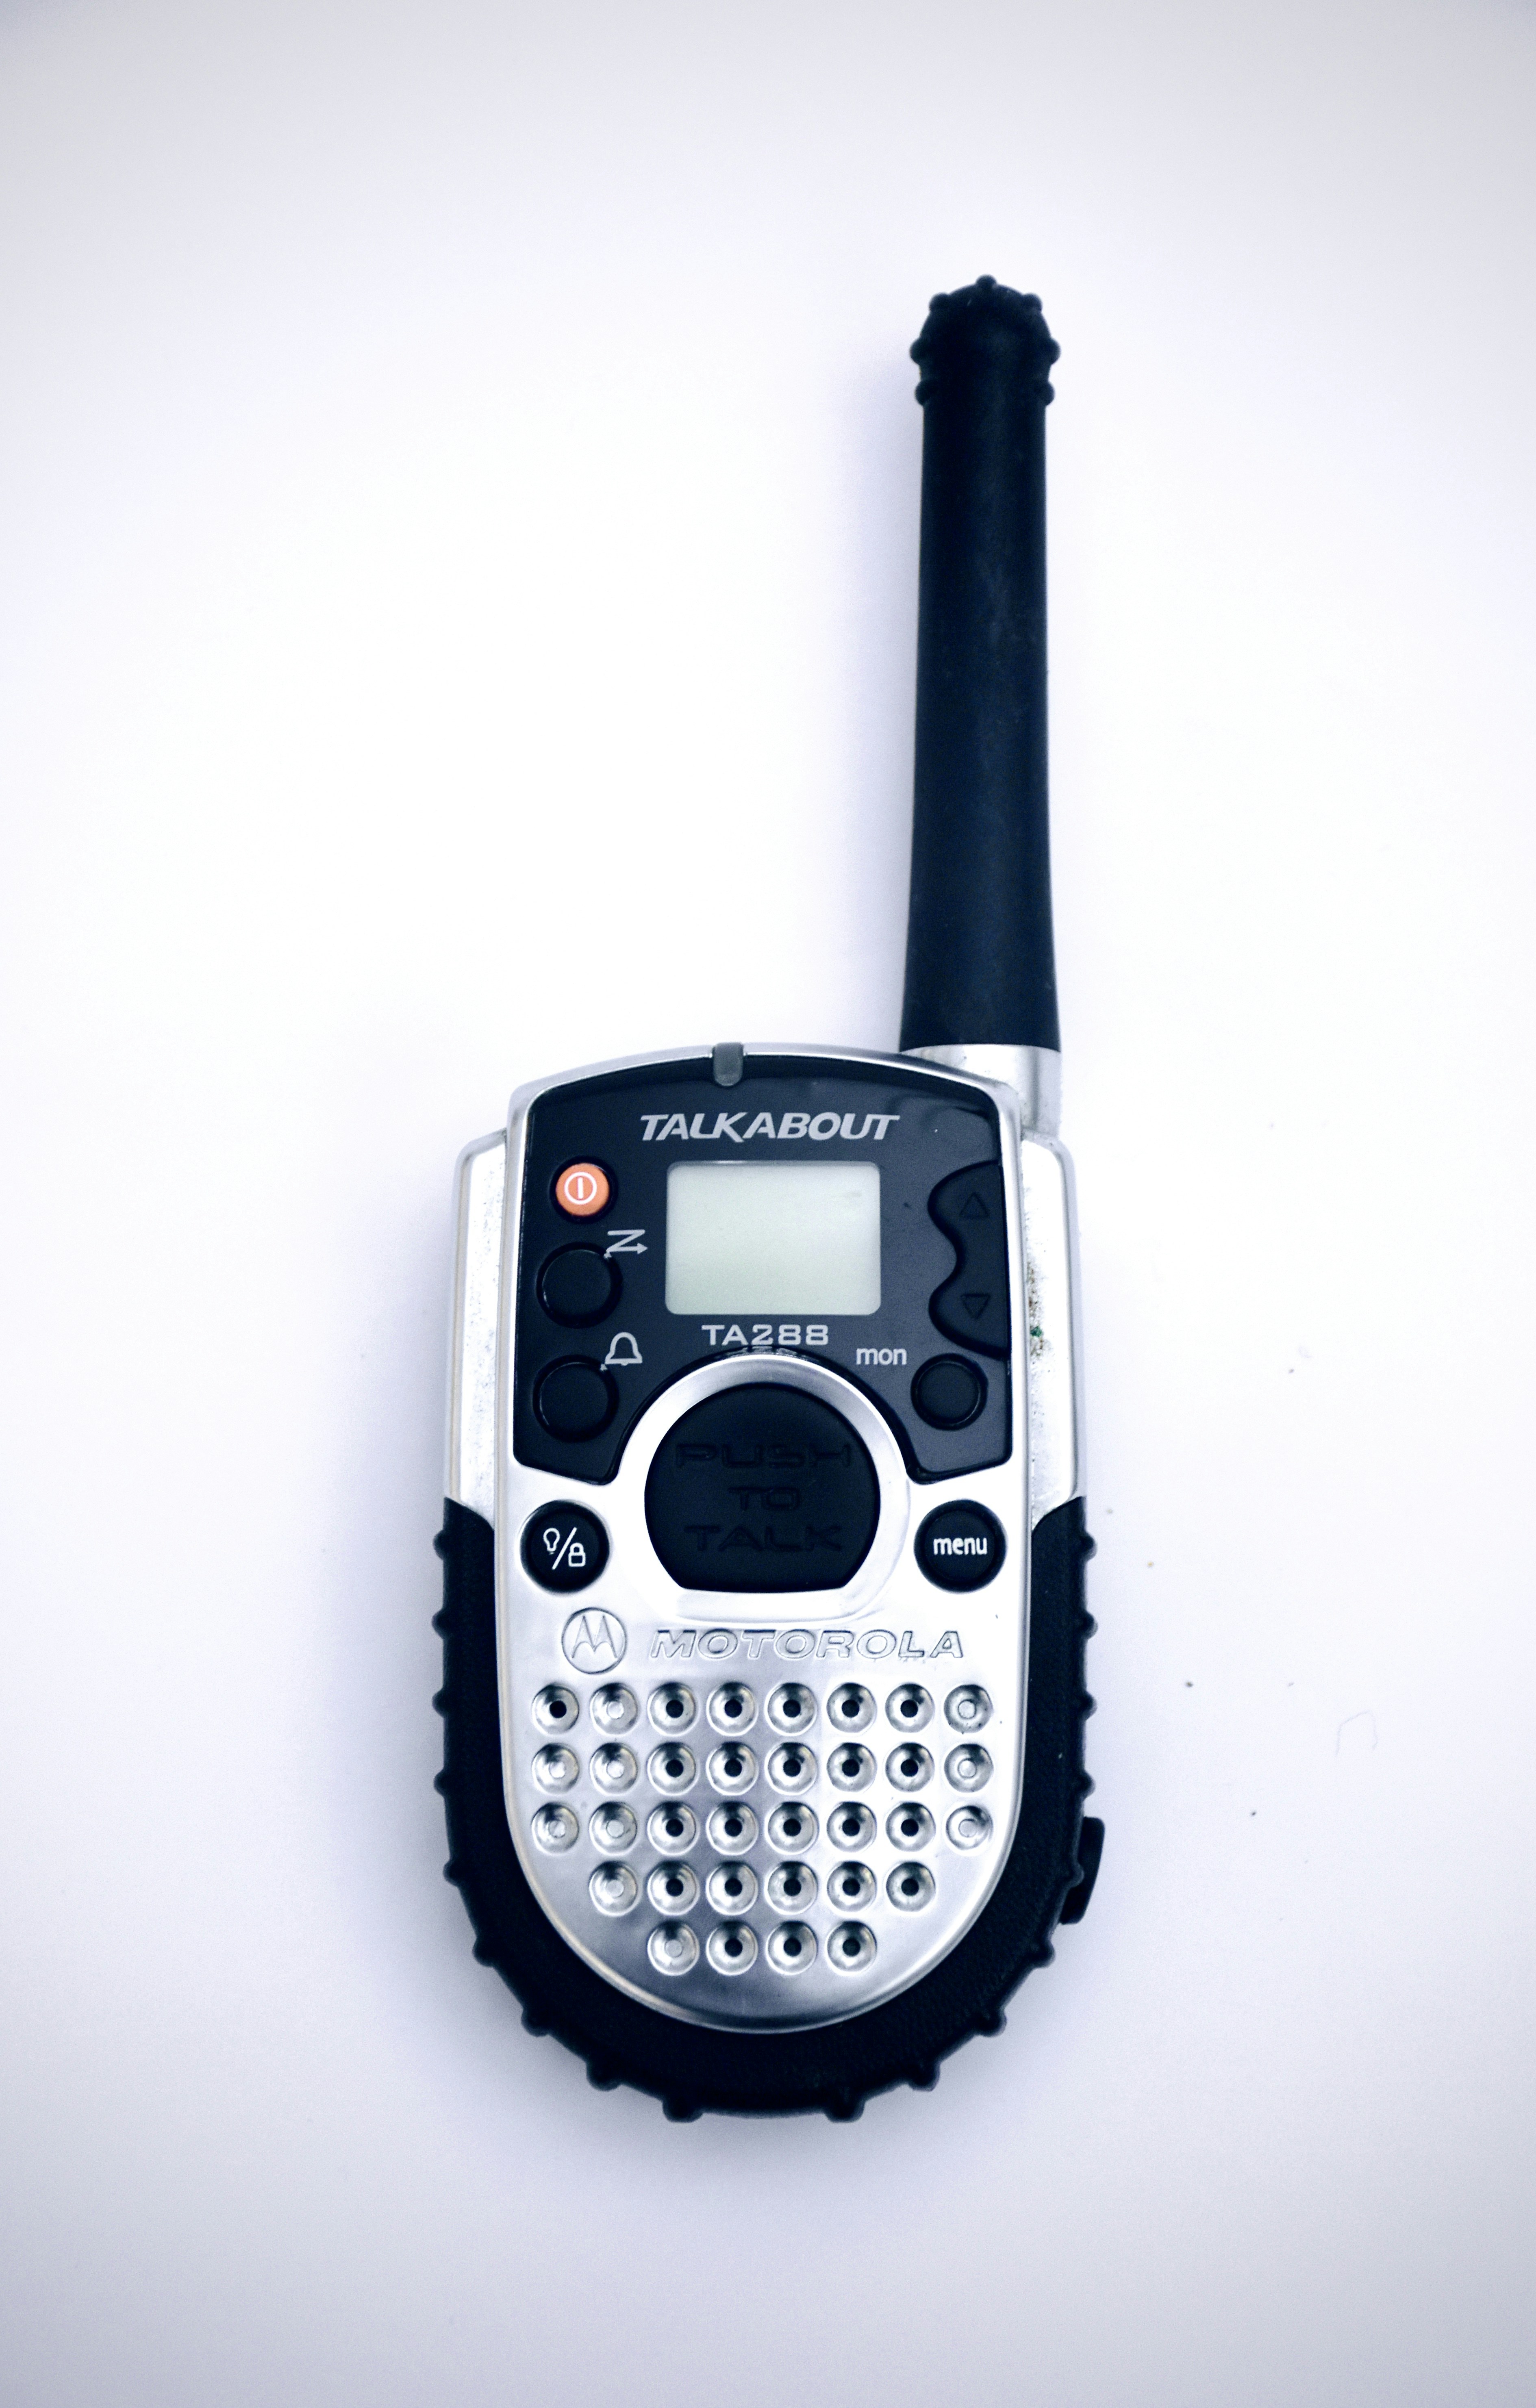 A fancy walkie talkie by the great company Motorola from Illinois, USA. Product was designed in the 1990s. The design is truly excellent and you just feel cool holding it.